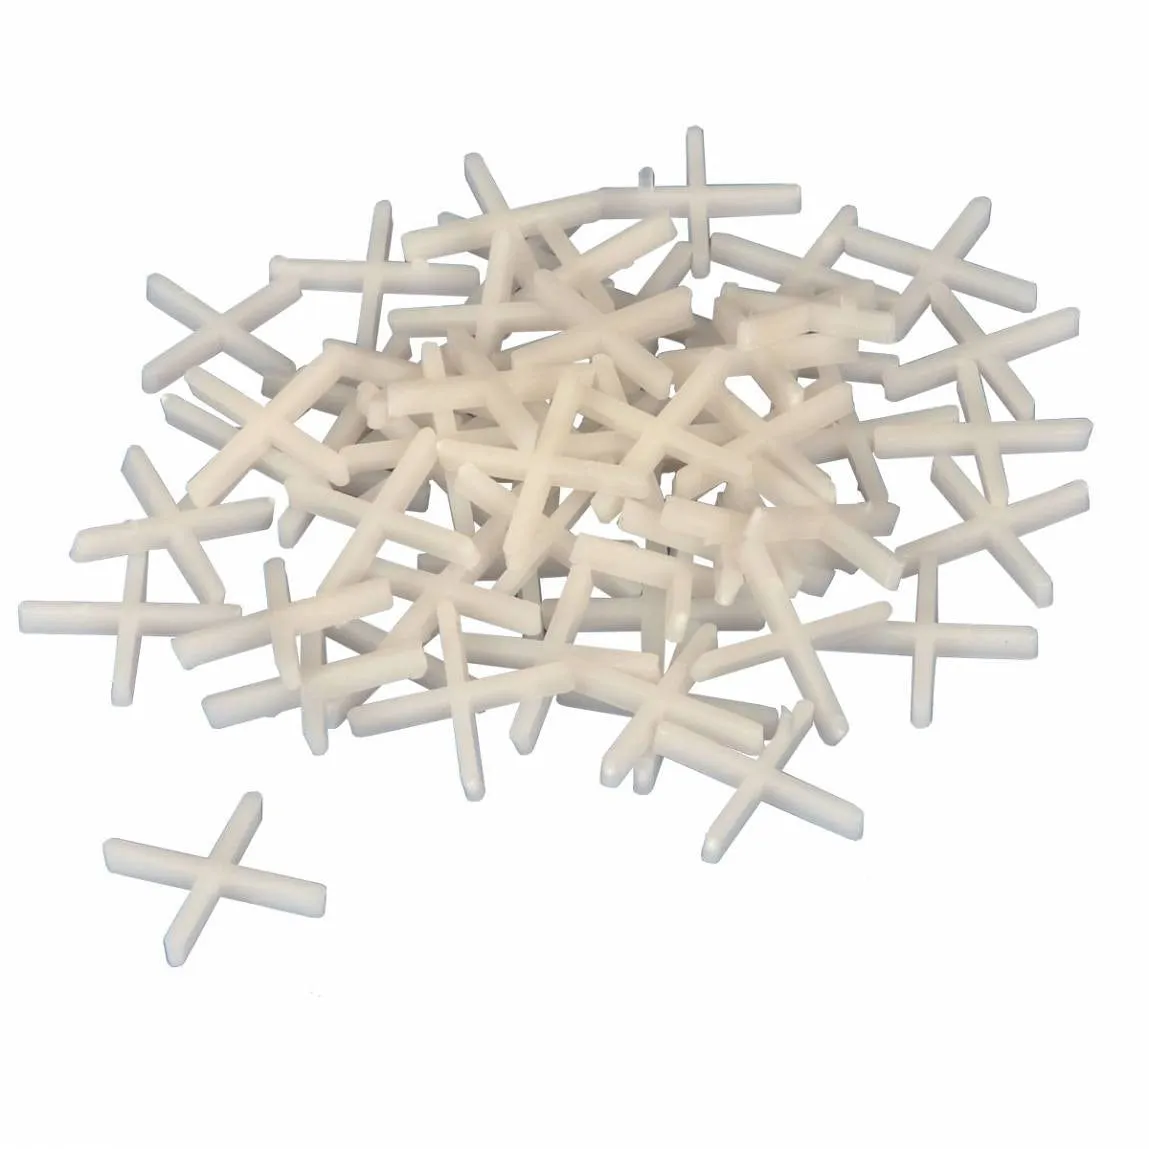 Vitrex 3mm tile spacers pack of 400